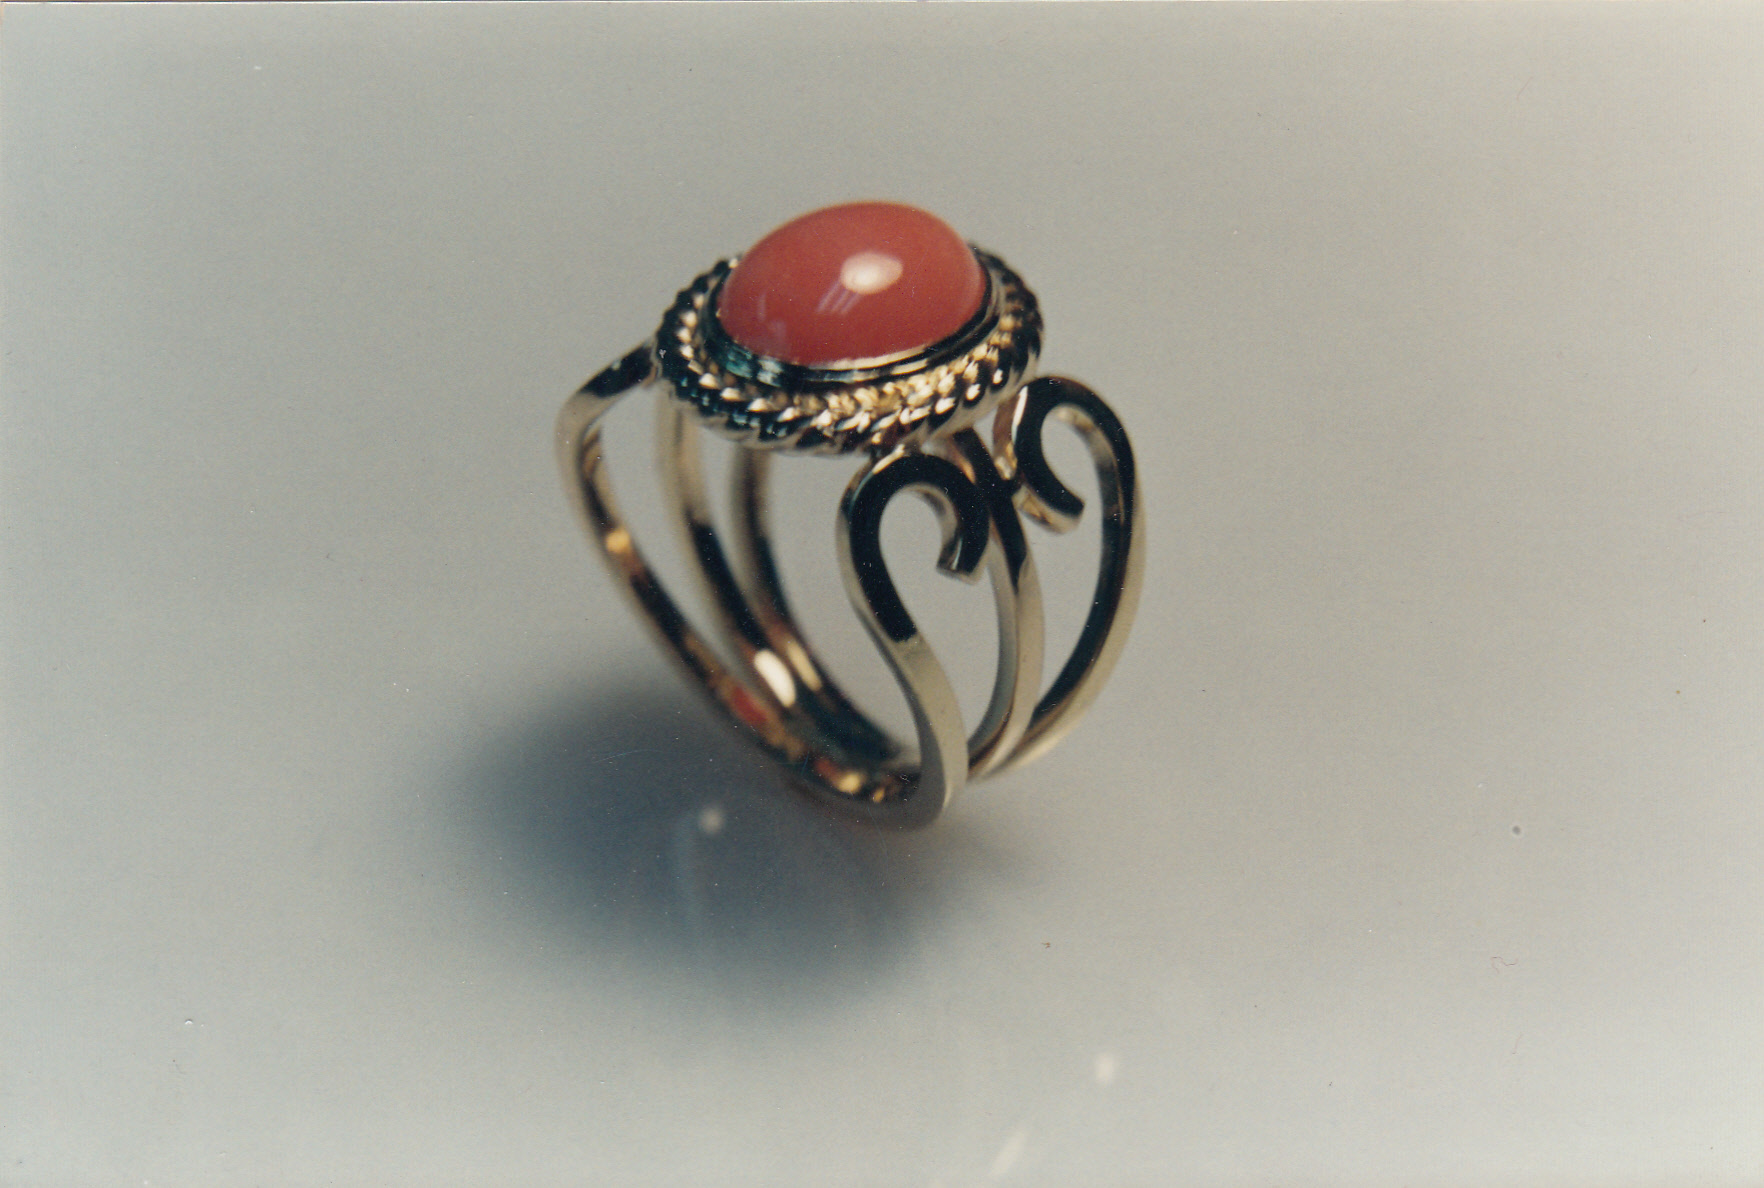 All hand wrought wire work ring with a bezel set Coral cabochon.